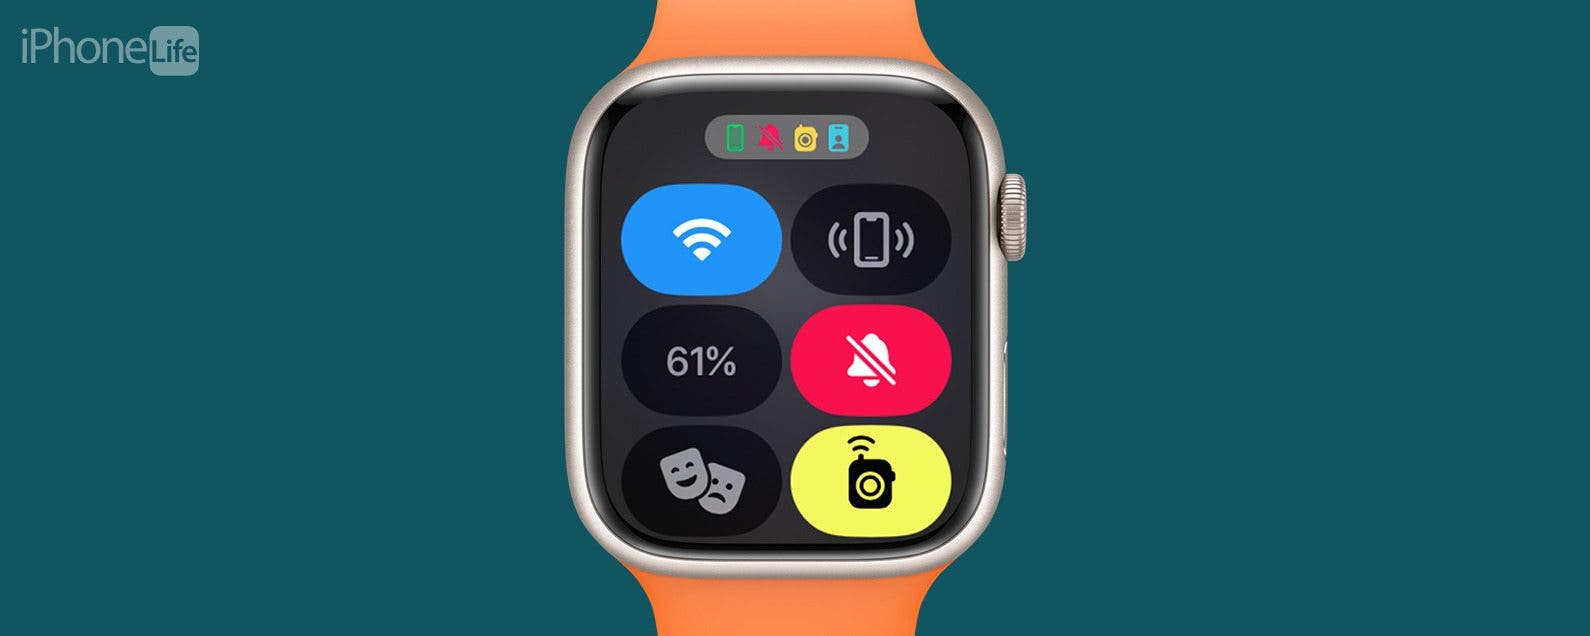 How to Ping iPhone from Apple Watch - Solve Your Tech